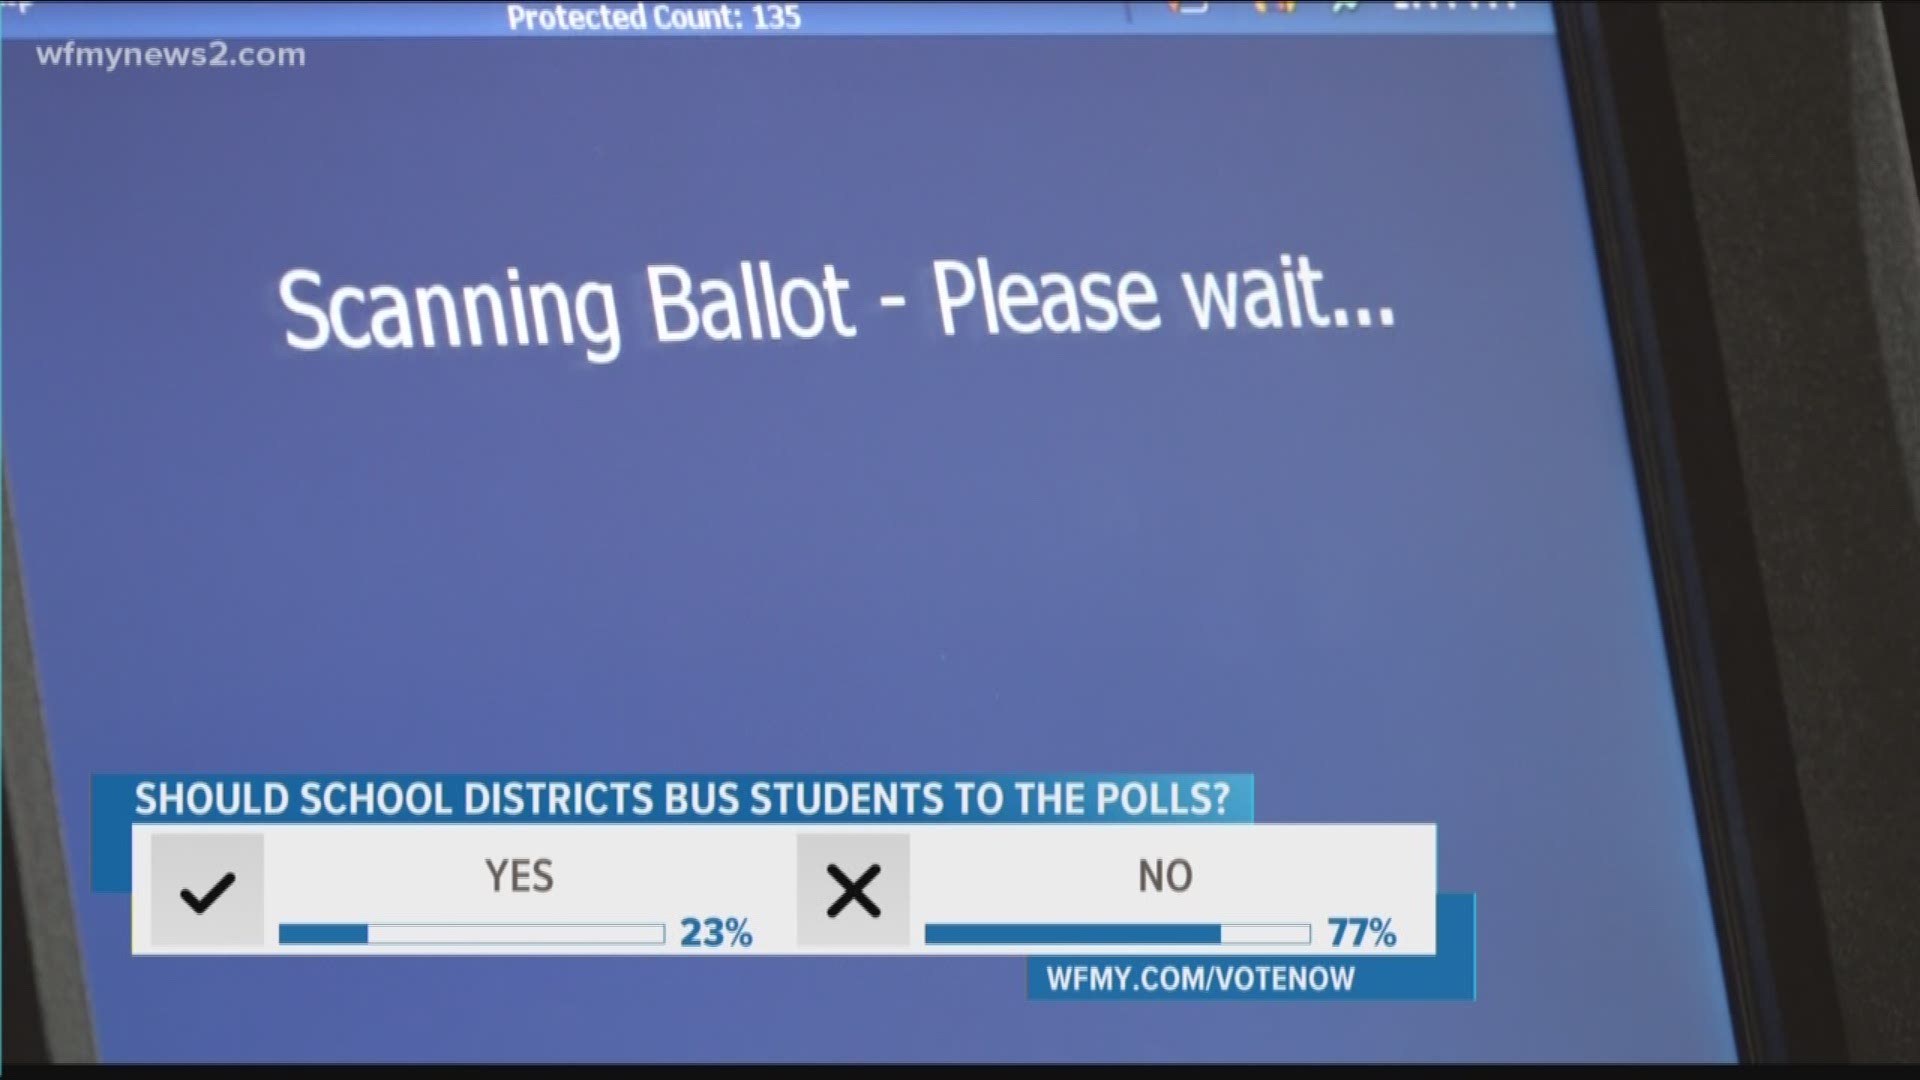 Parents have a mixed reaction to Guilford county schools’ decision to bus students to polling locations so they can vote.